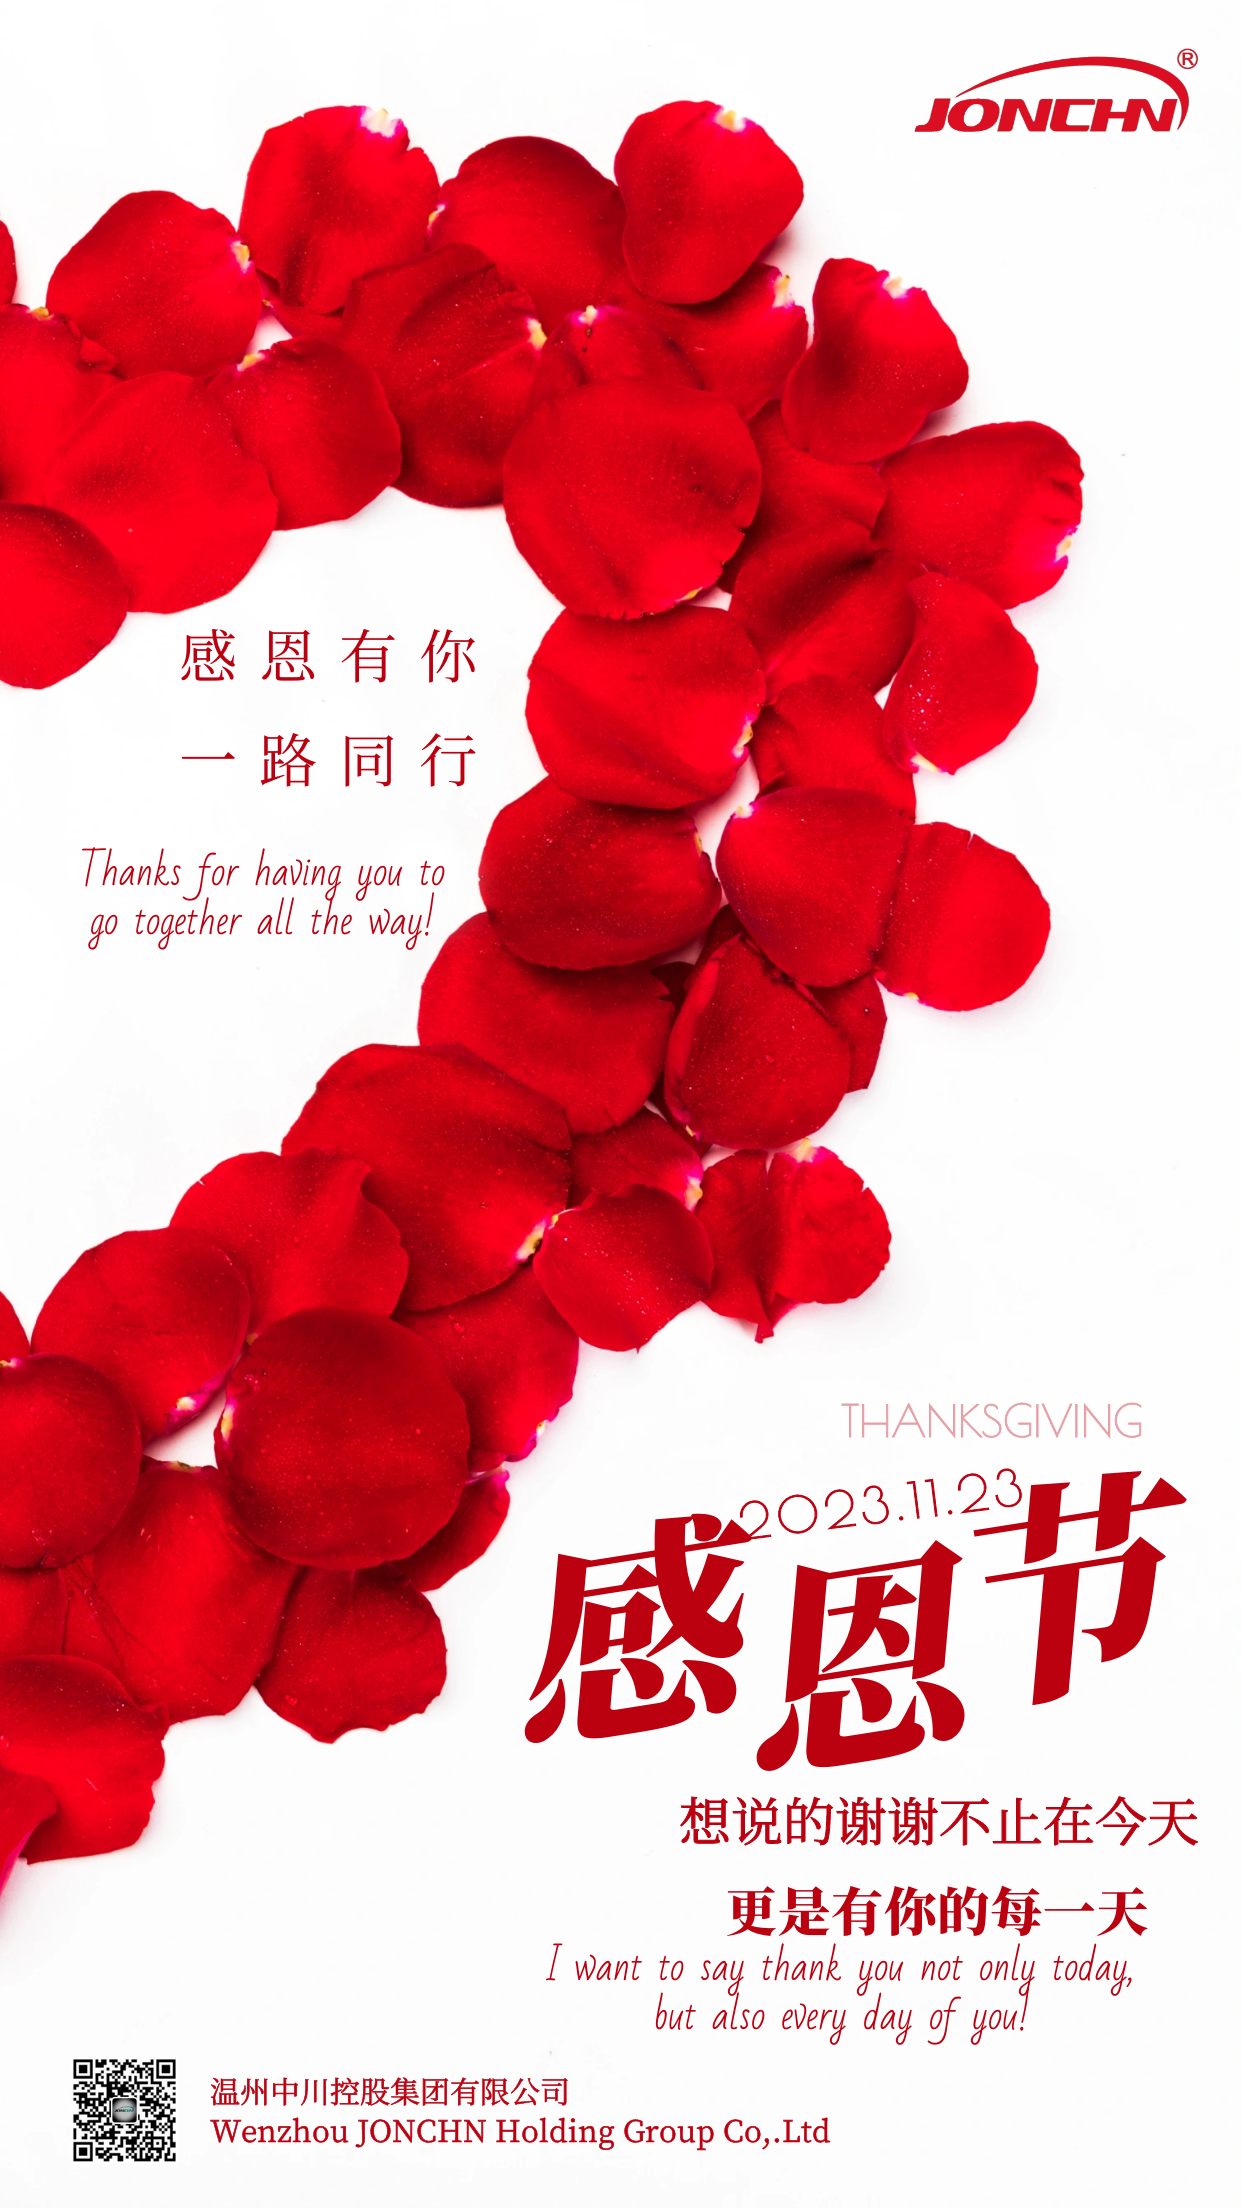 Thanksgiving Day| Thanks for having you to go together all the way! 感恩节|感恩有你，一路同行